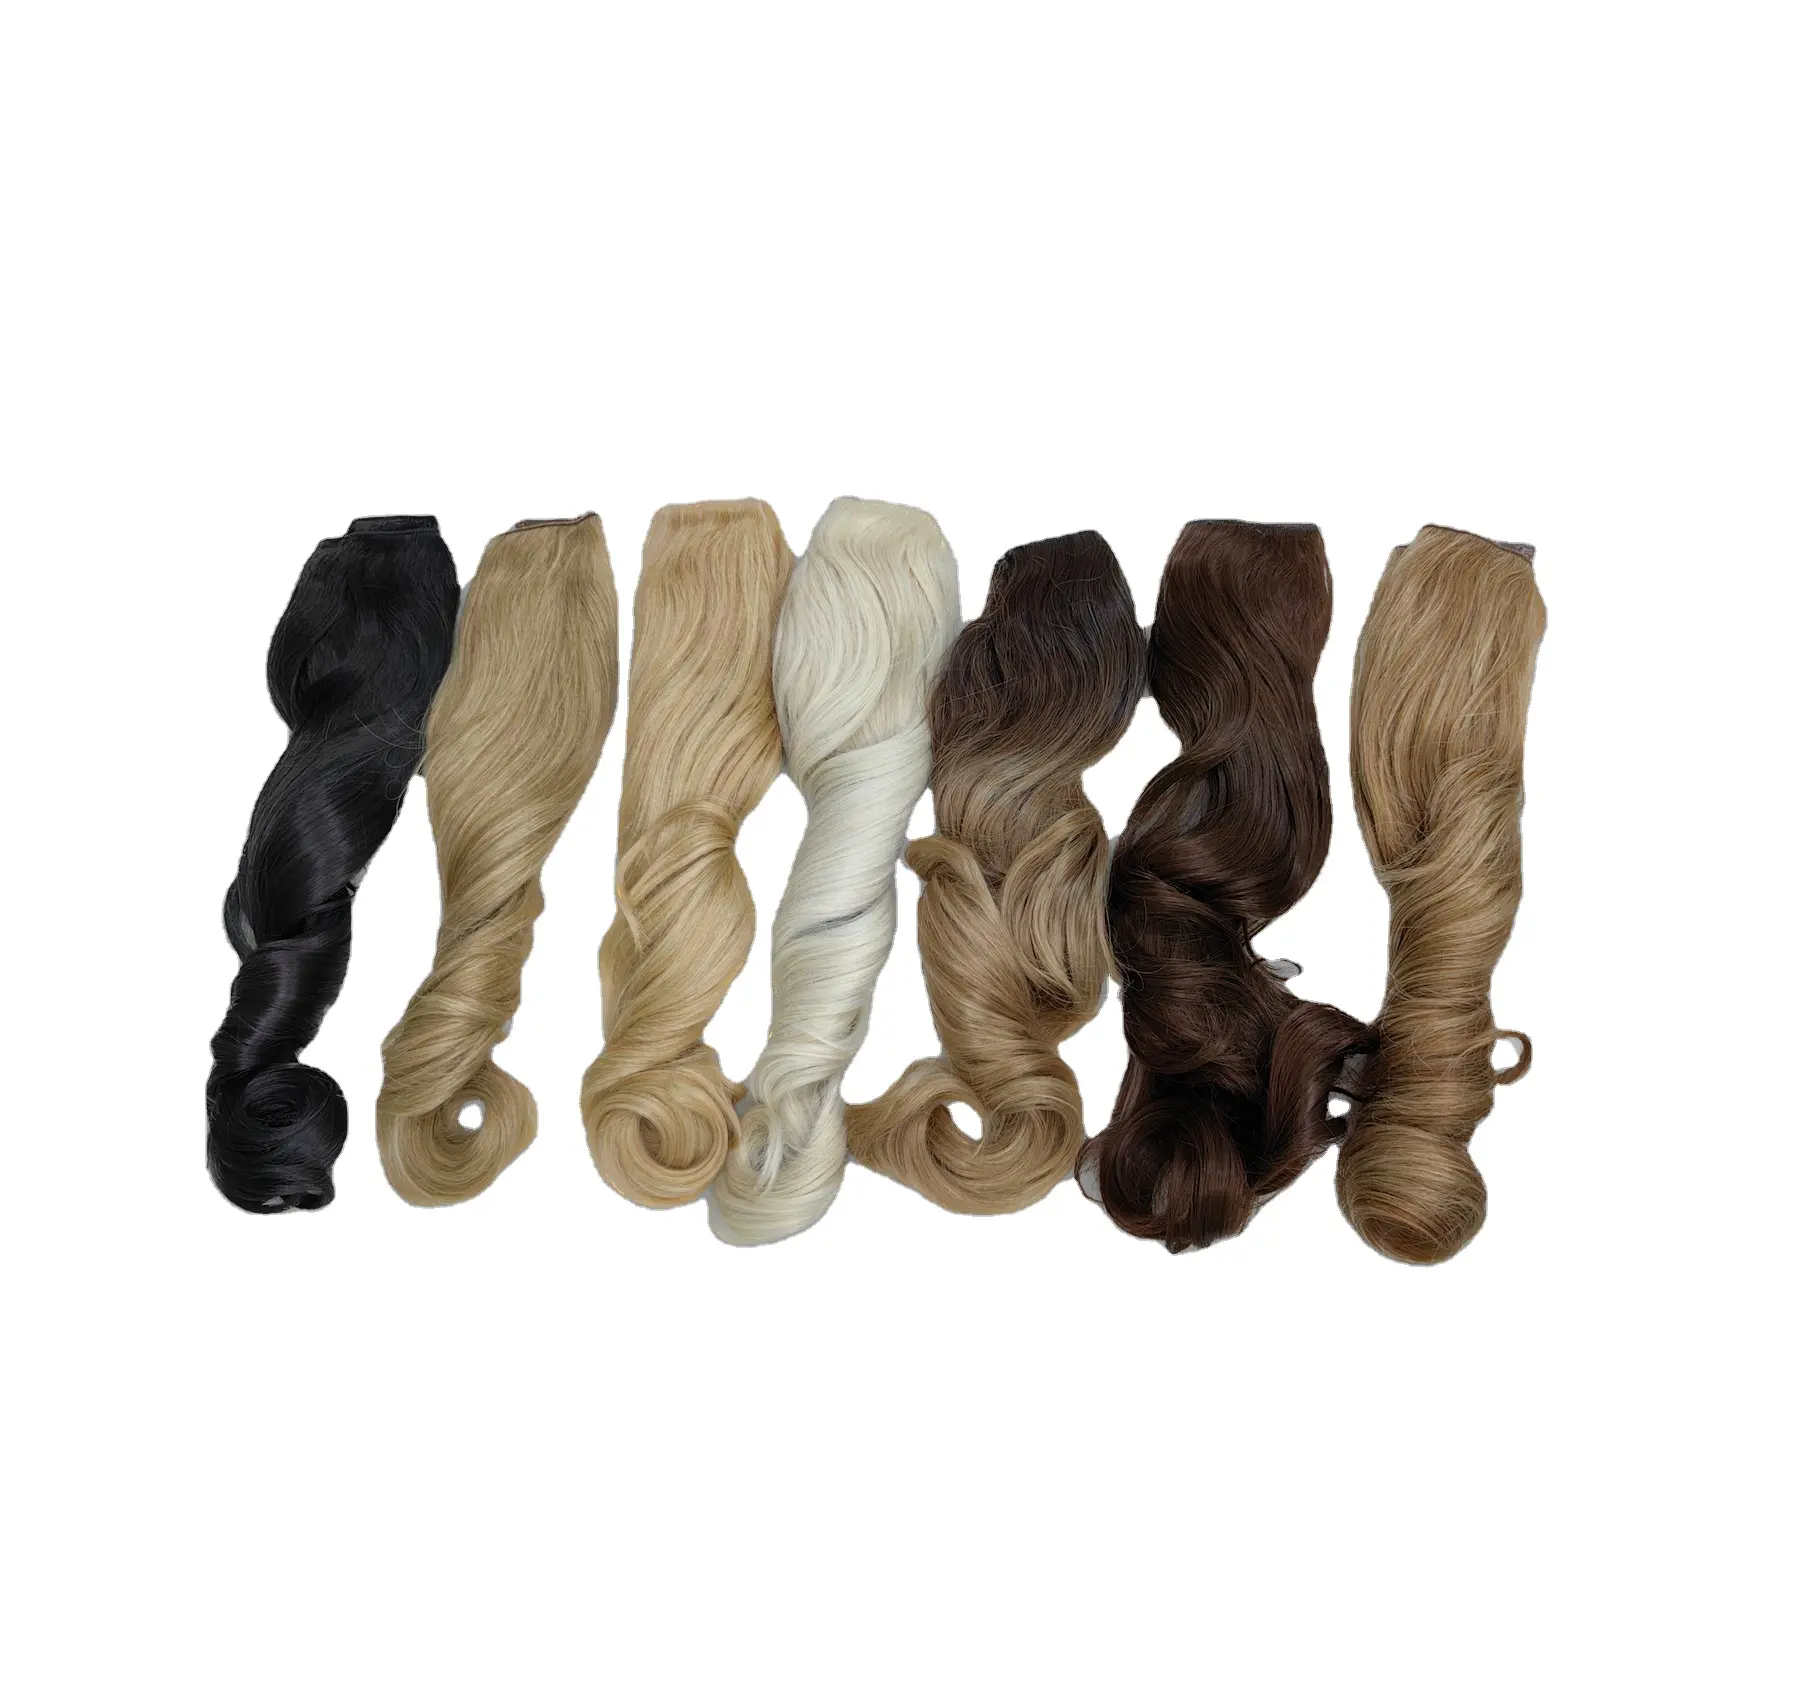 Natural Looking Synthetic Hair Extension One Piece Clip In Hair Synthetic Hair Half Wigs Synthetic Material